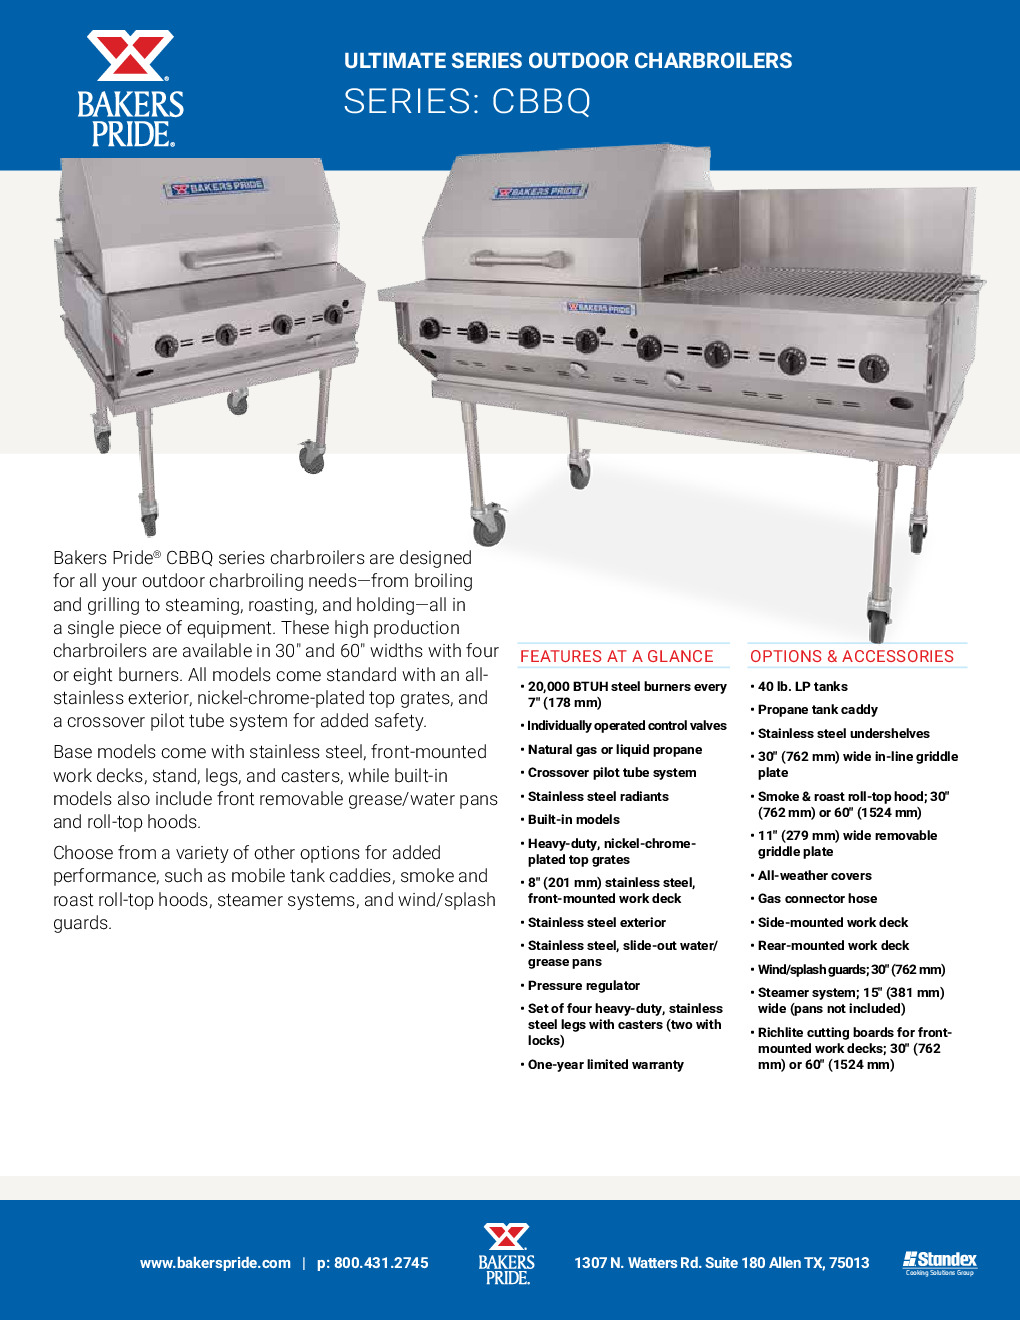 Bakers Pride CBBQ-30BI Outdoor Grill Gas Charbroiler